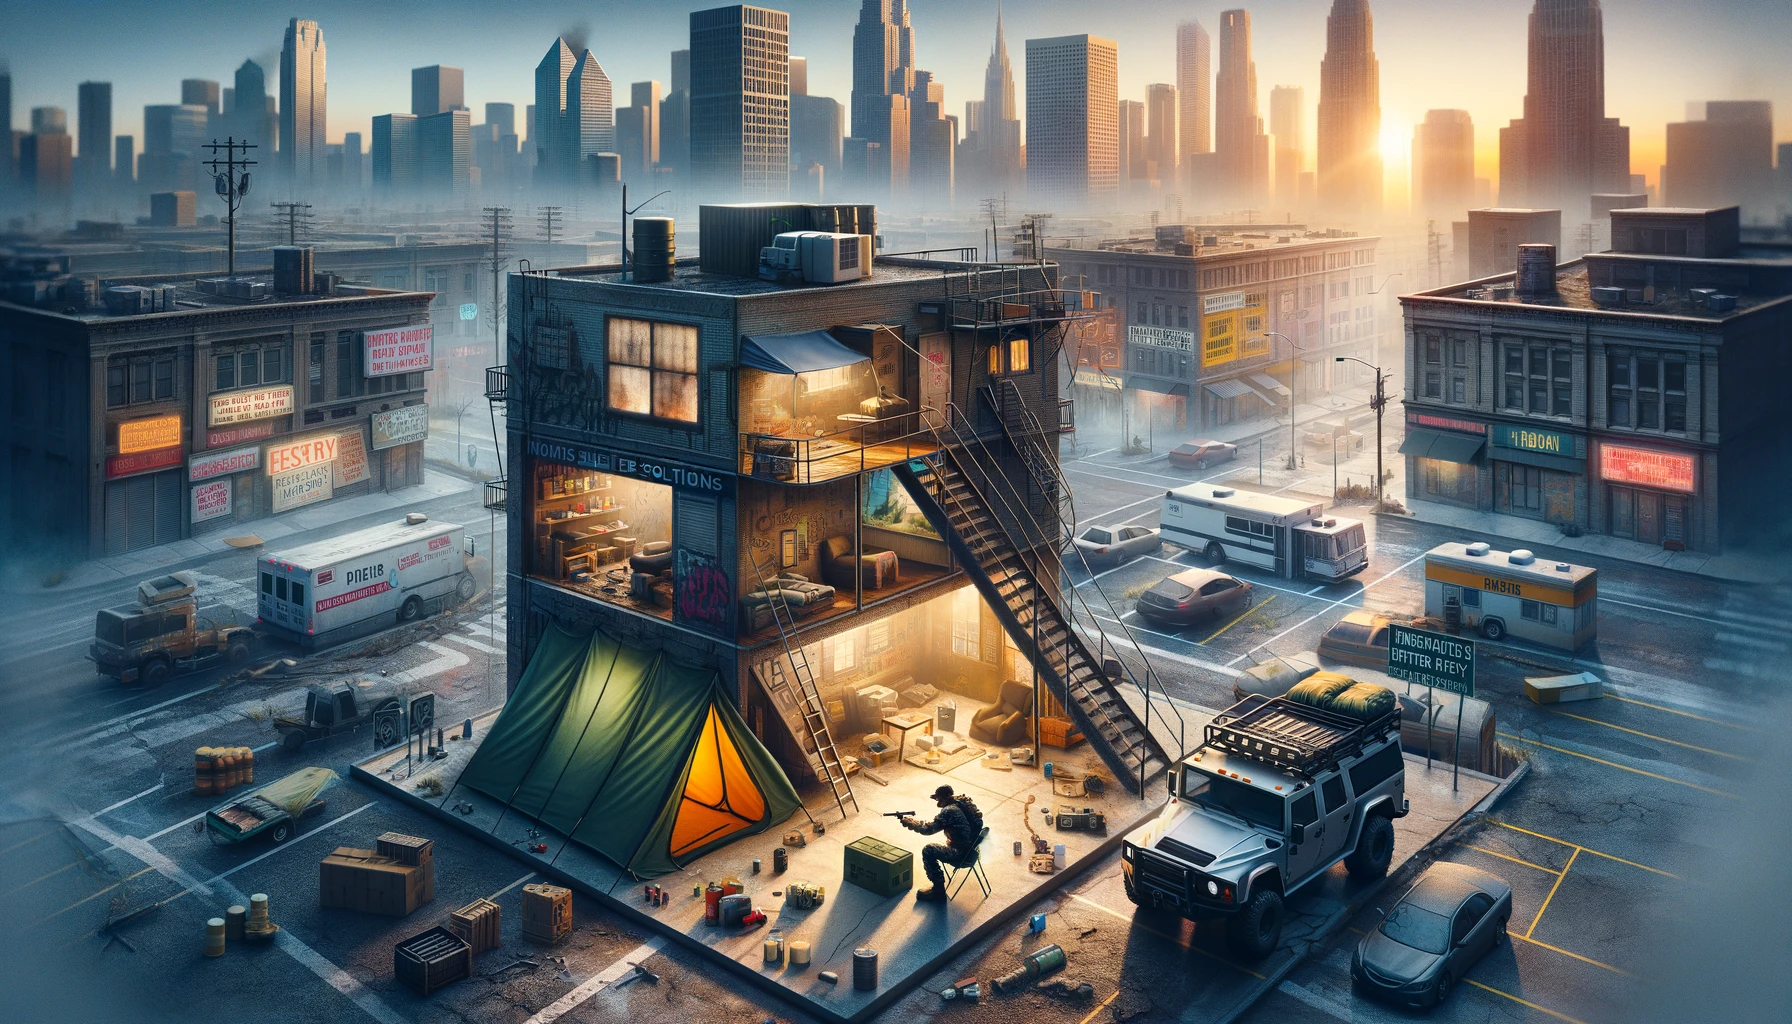 Prepper utilizing innovative shelter solutions in an urban emergency, with modified vehicles and makeshift tents against a cityscape reflecting urgency and adaptability